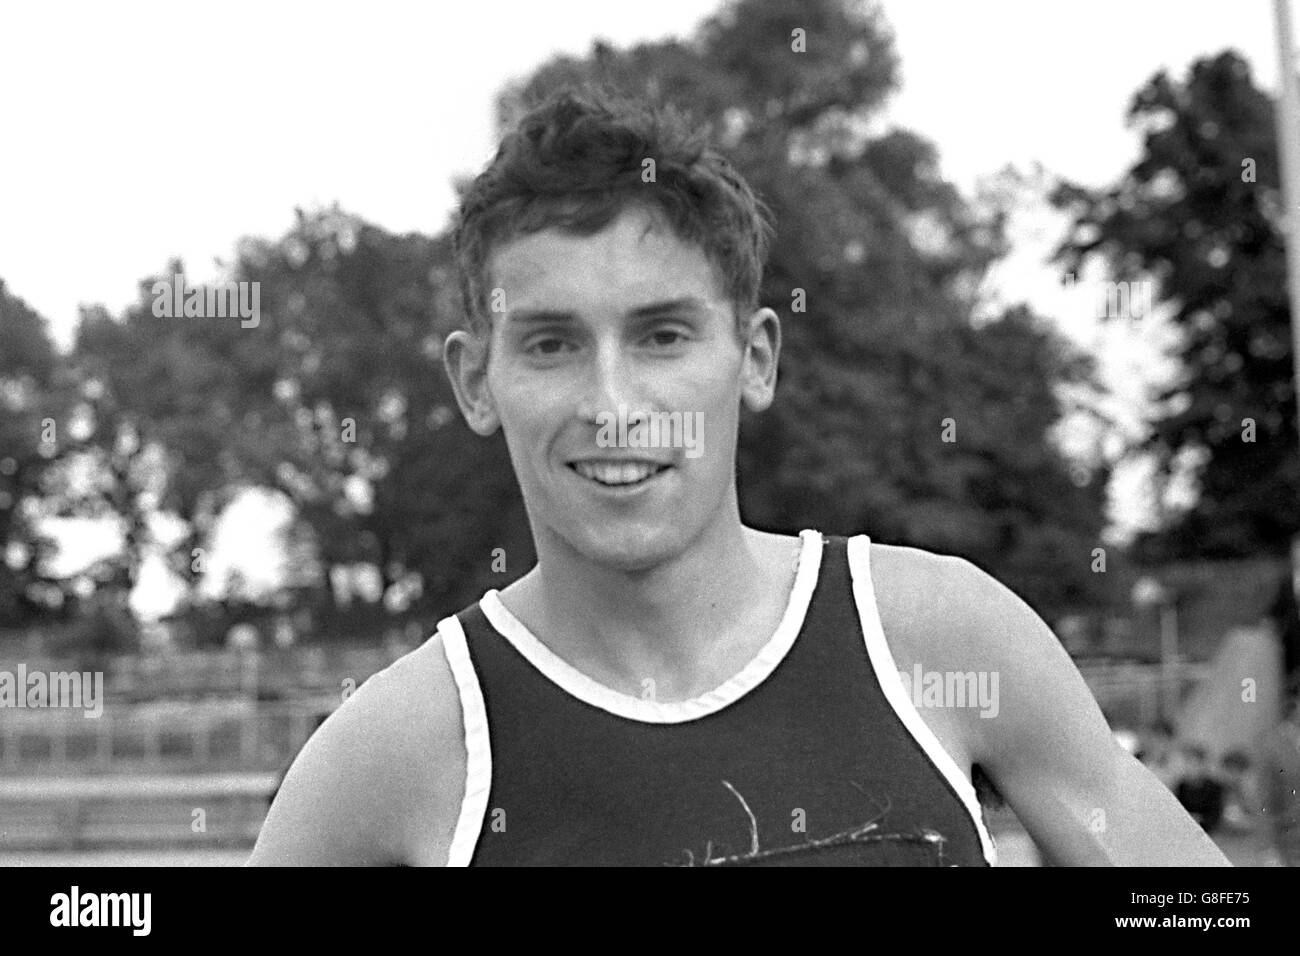 British 5,000 metres runner Ian Stewart, who is is to run at the 1972 Munich Olympic Games. Stock Photo